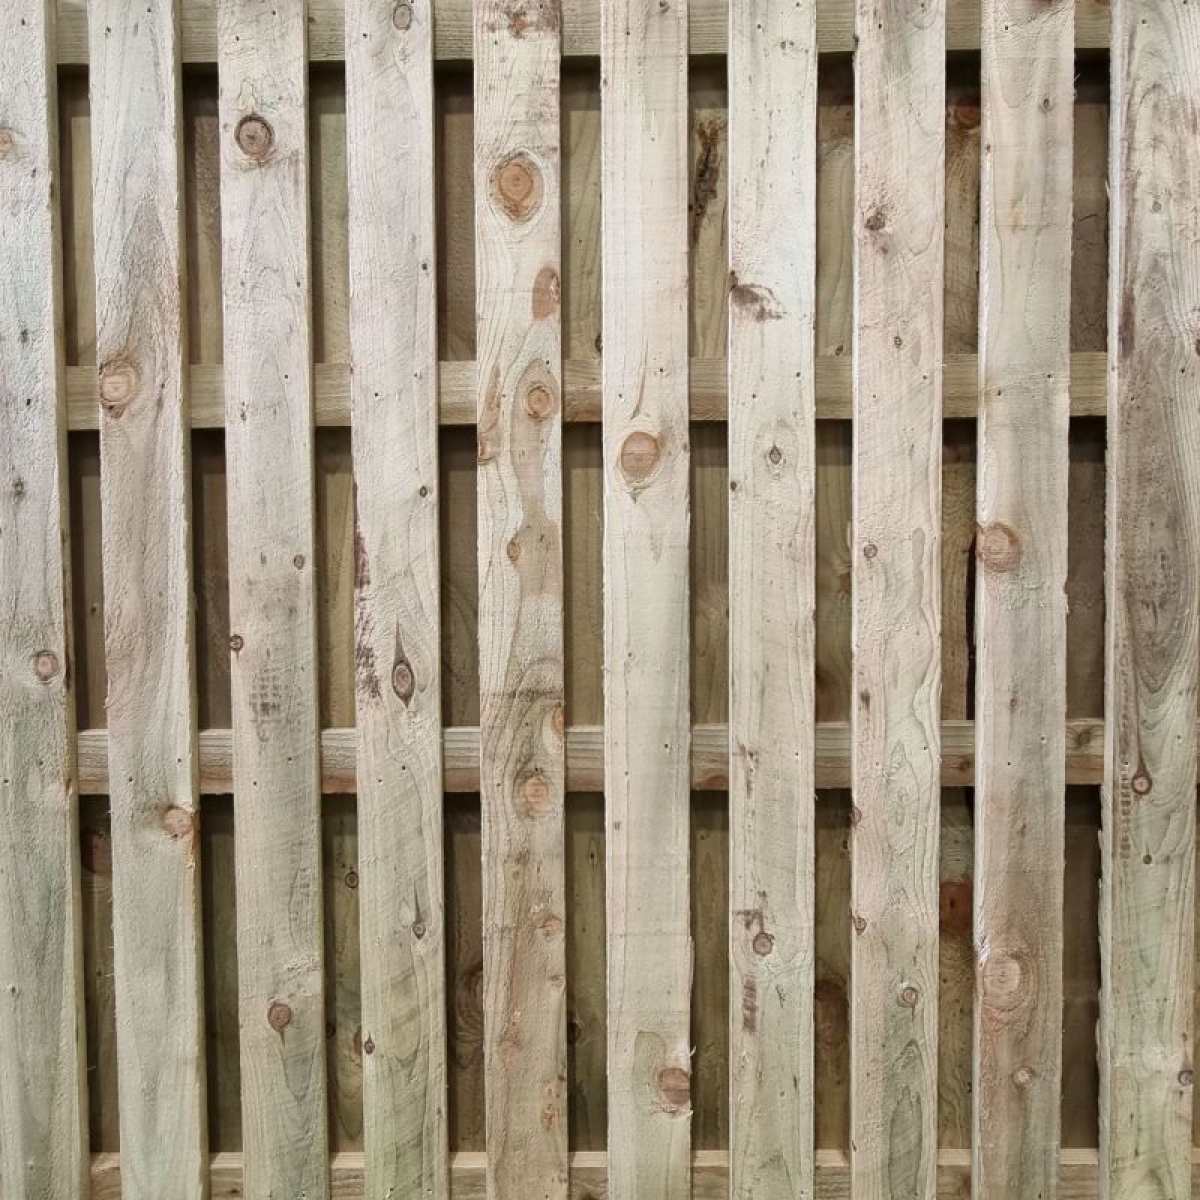 Heavy Duty Double Sided Pailing Fence